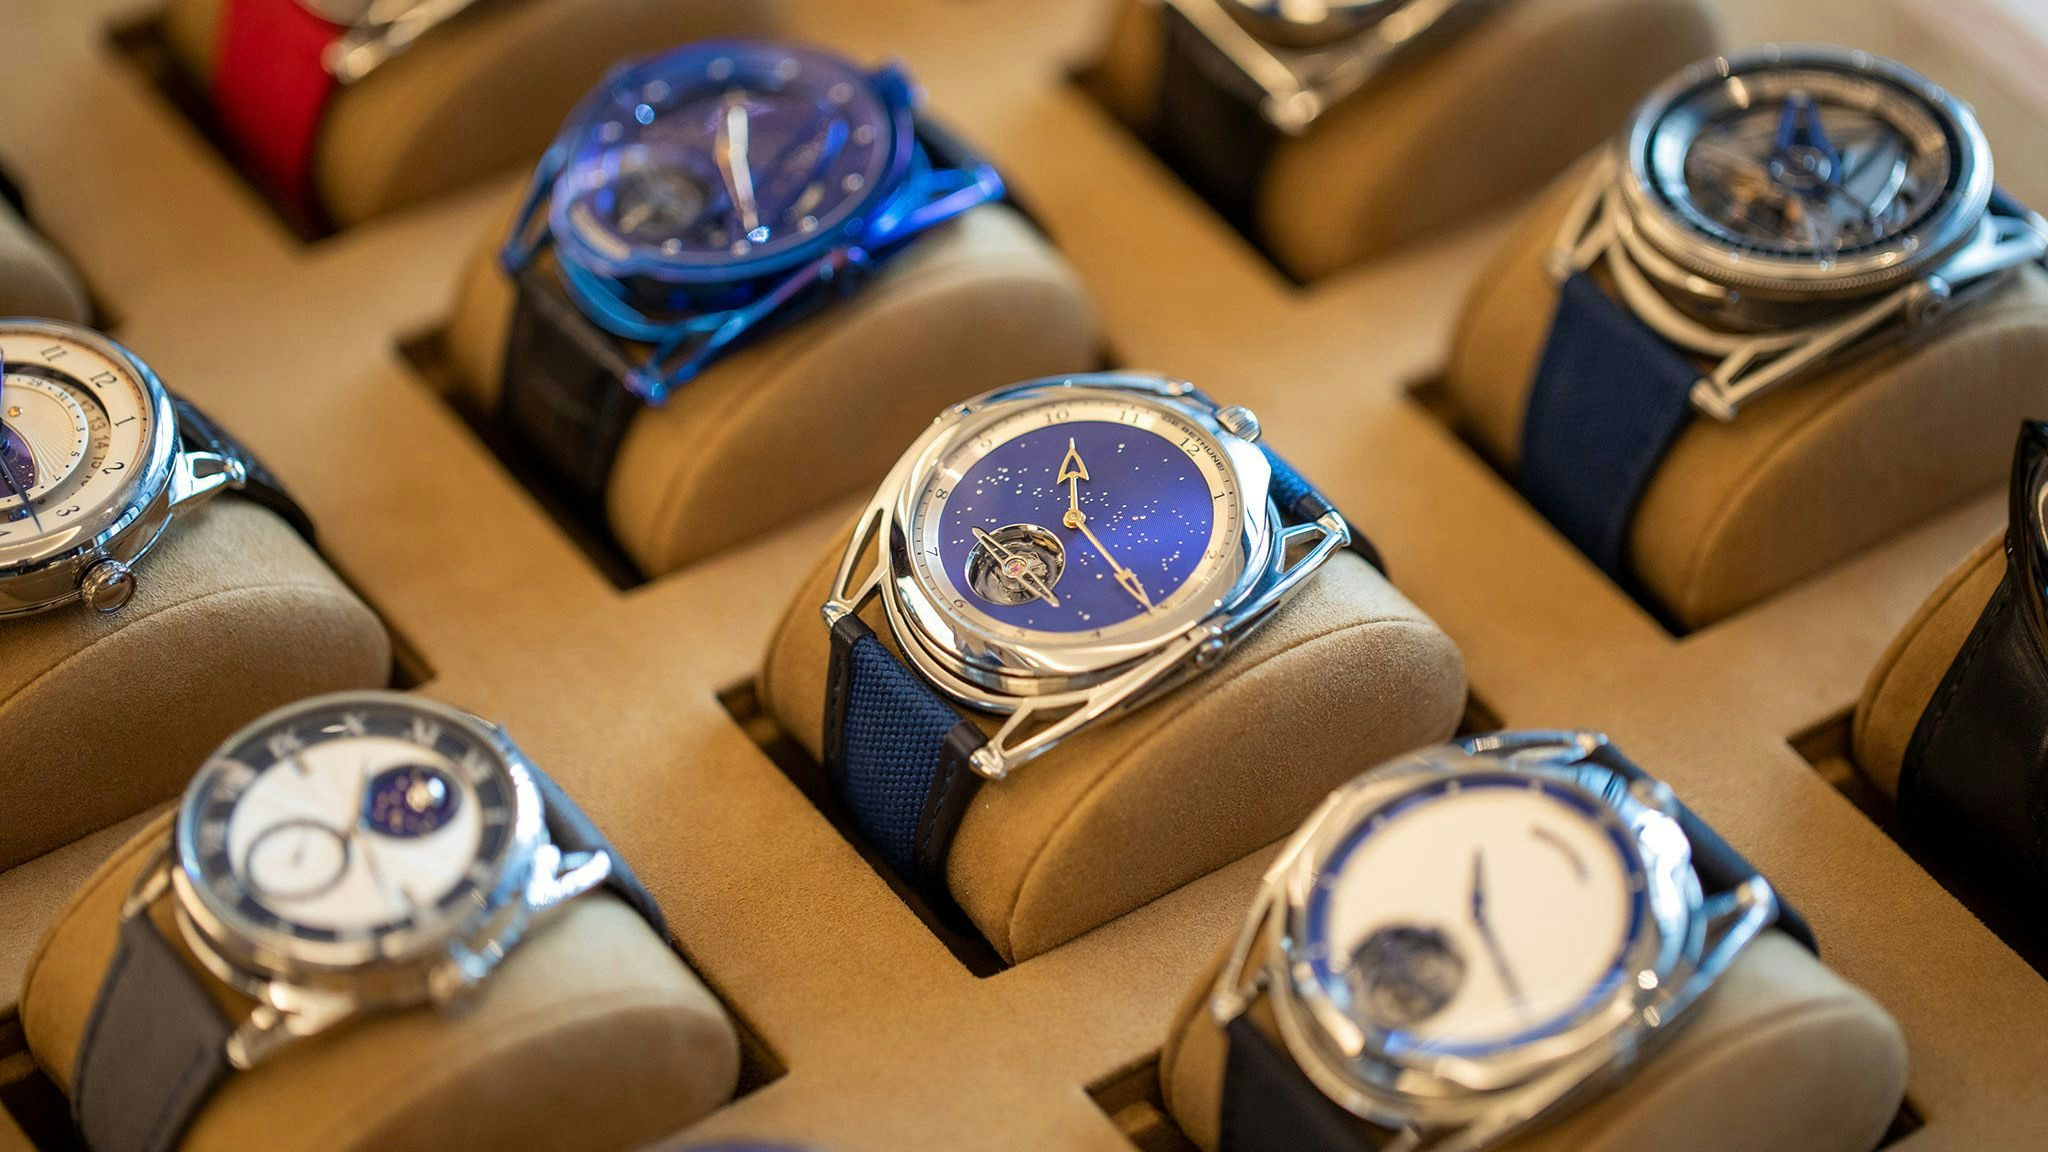 Time to shine: The bright future of China's pre-owned luxury watch market